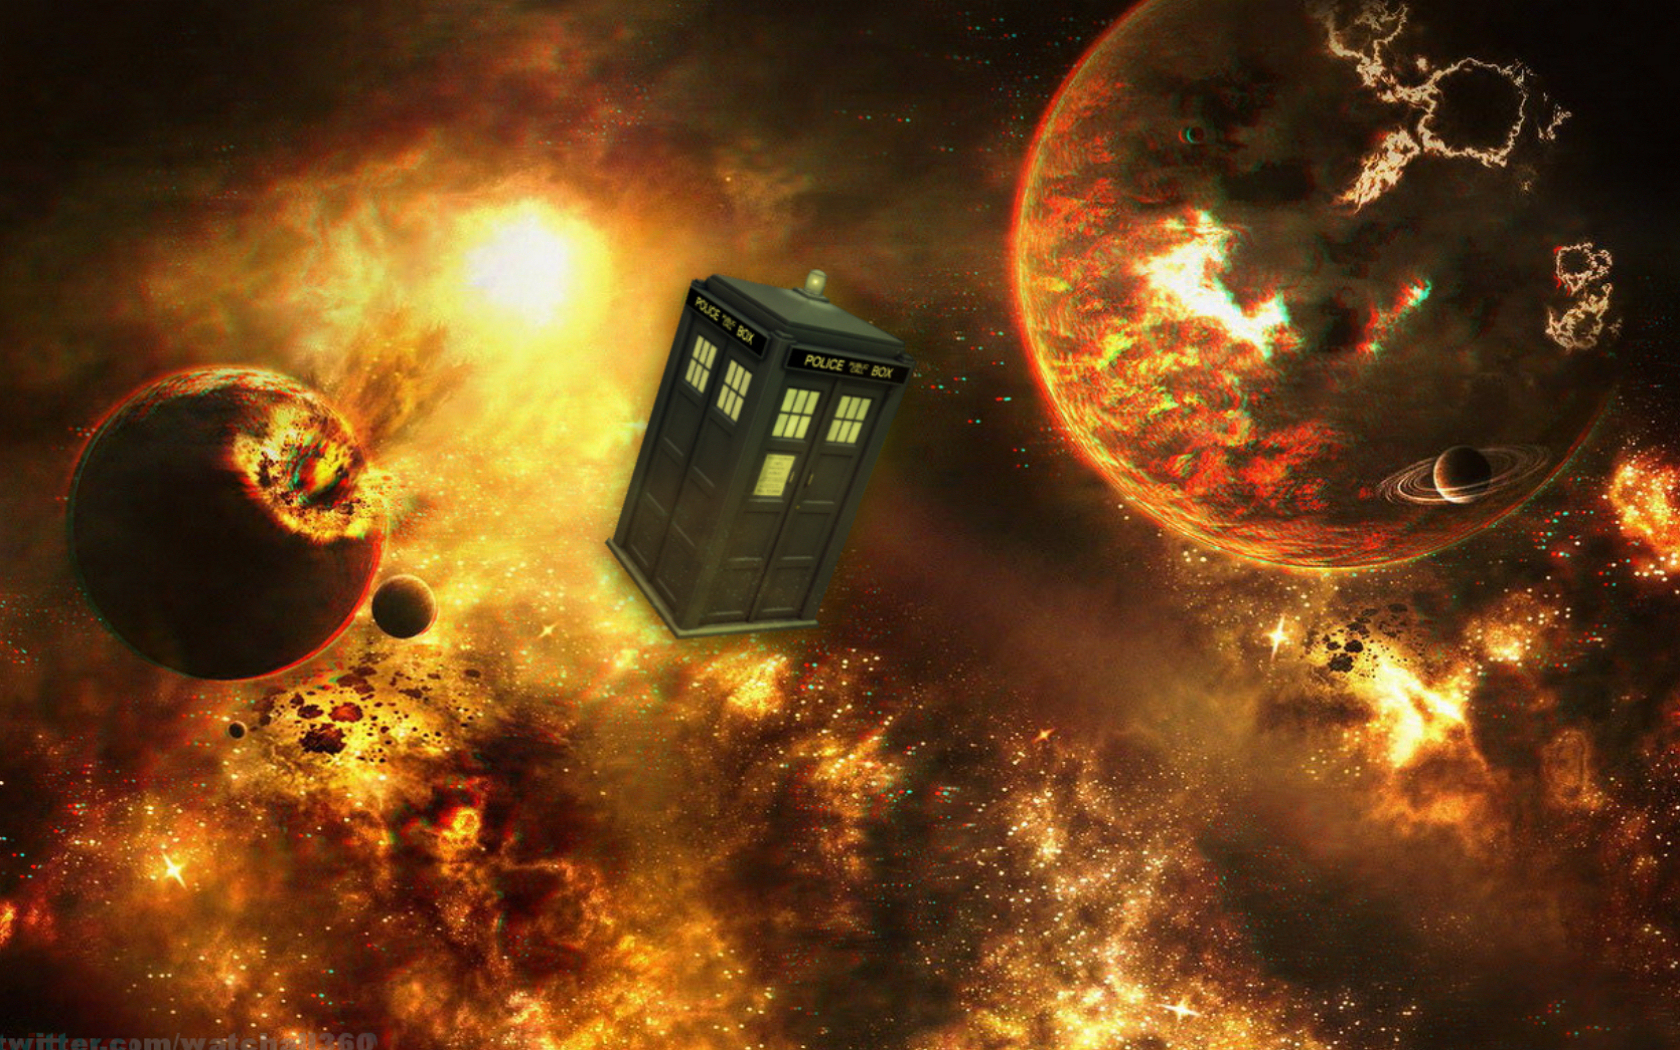 Dr who Computer Wallpapers, Desktop Backgrounds 1680x1050 ID